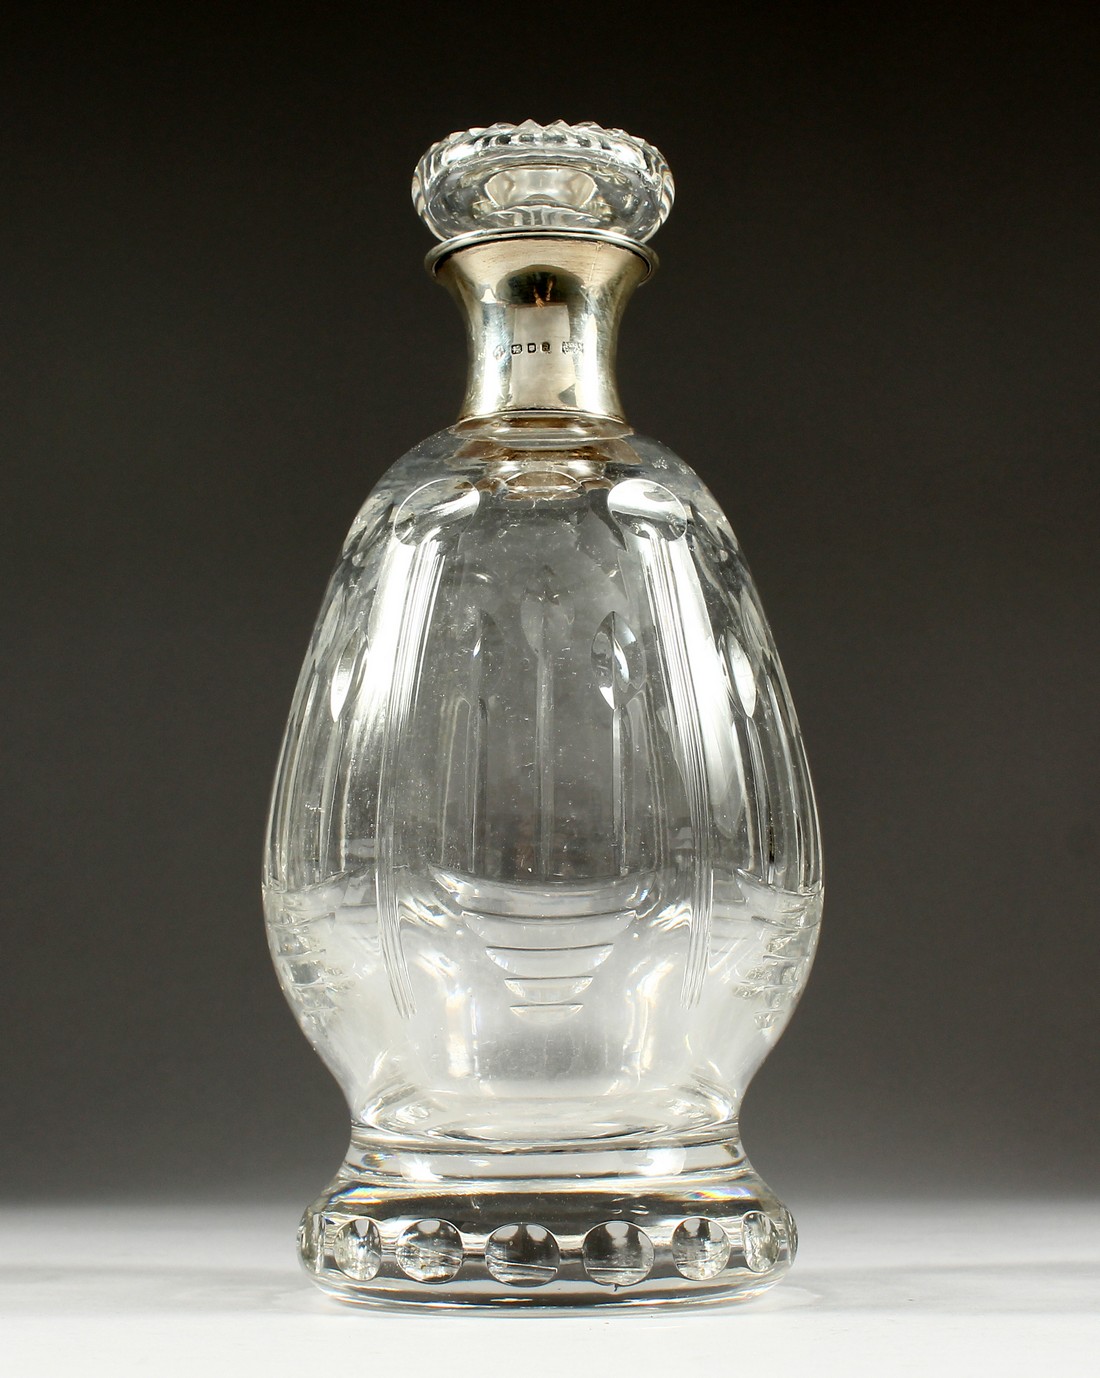 AN ASPREY CUT GLASS DECANTER AND STOPPER with silver band.